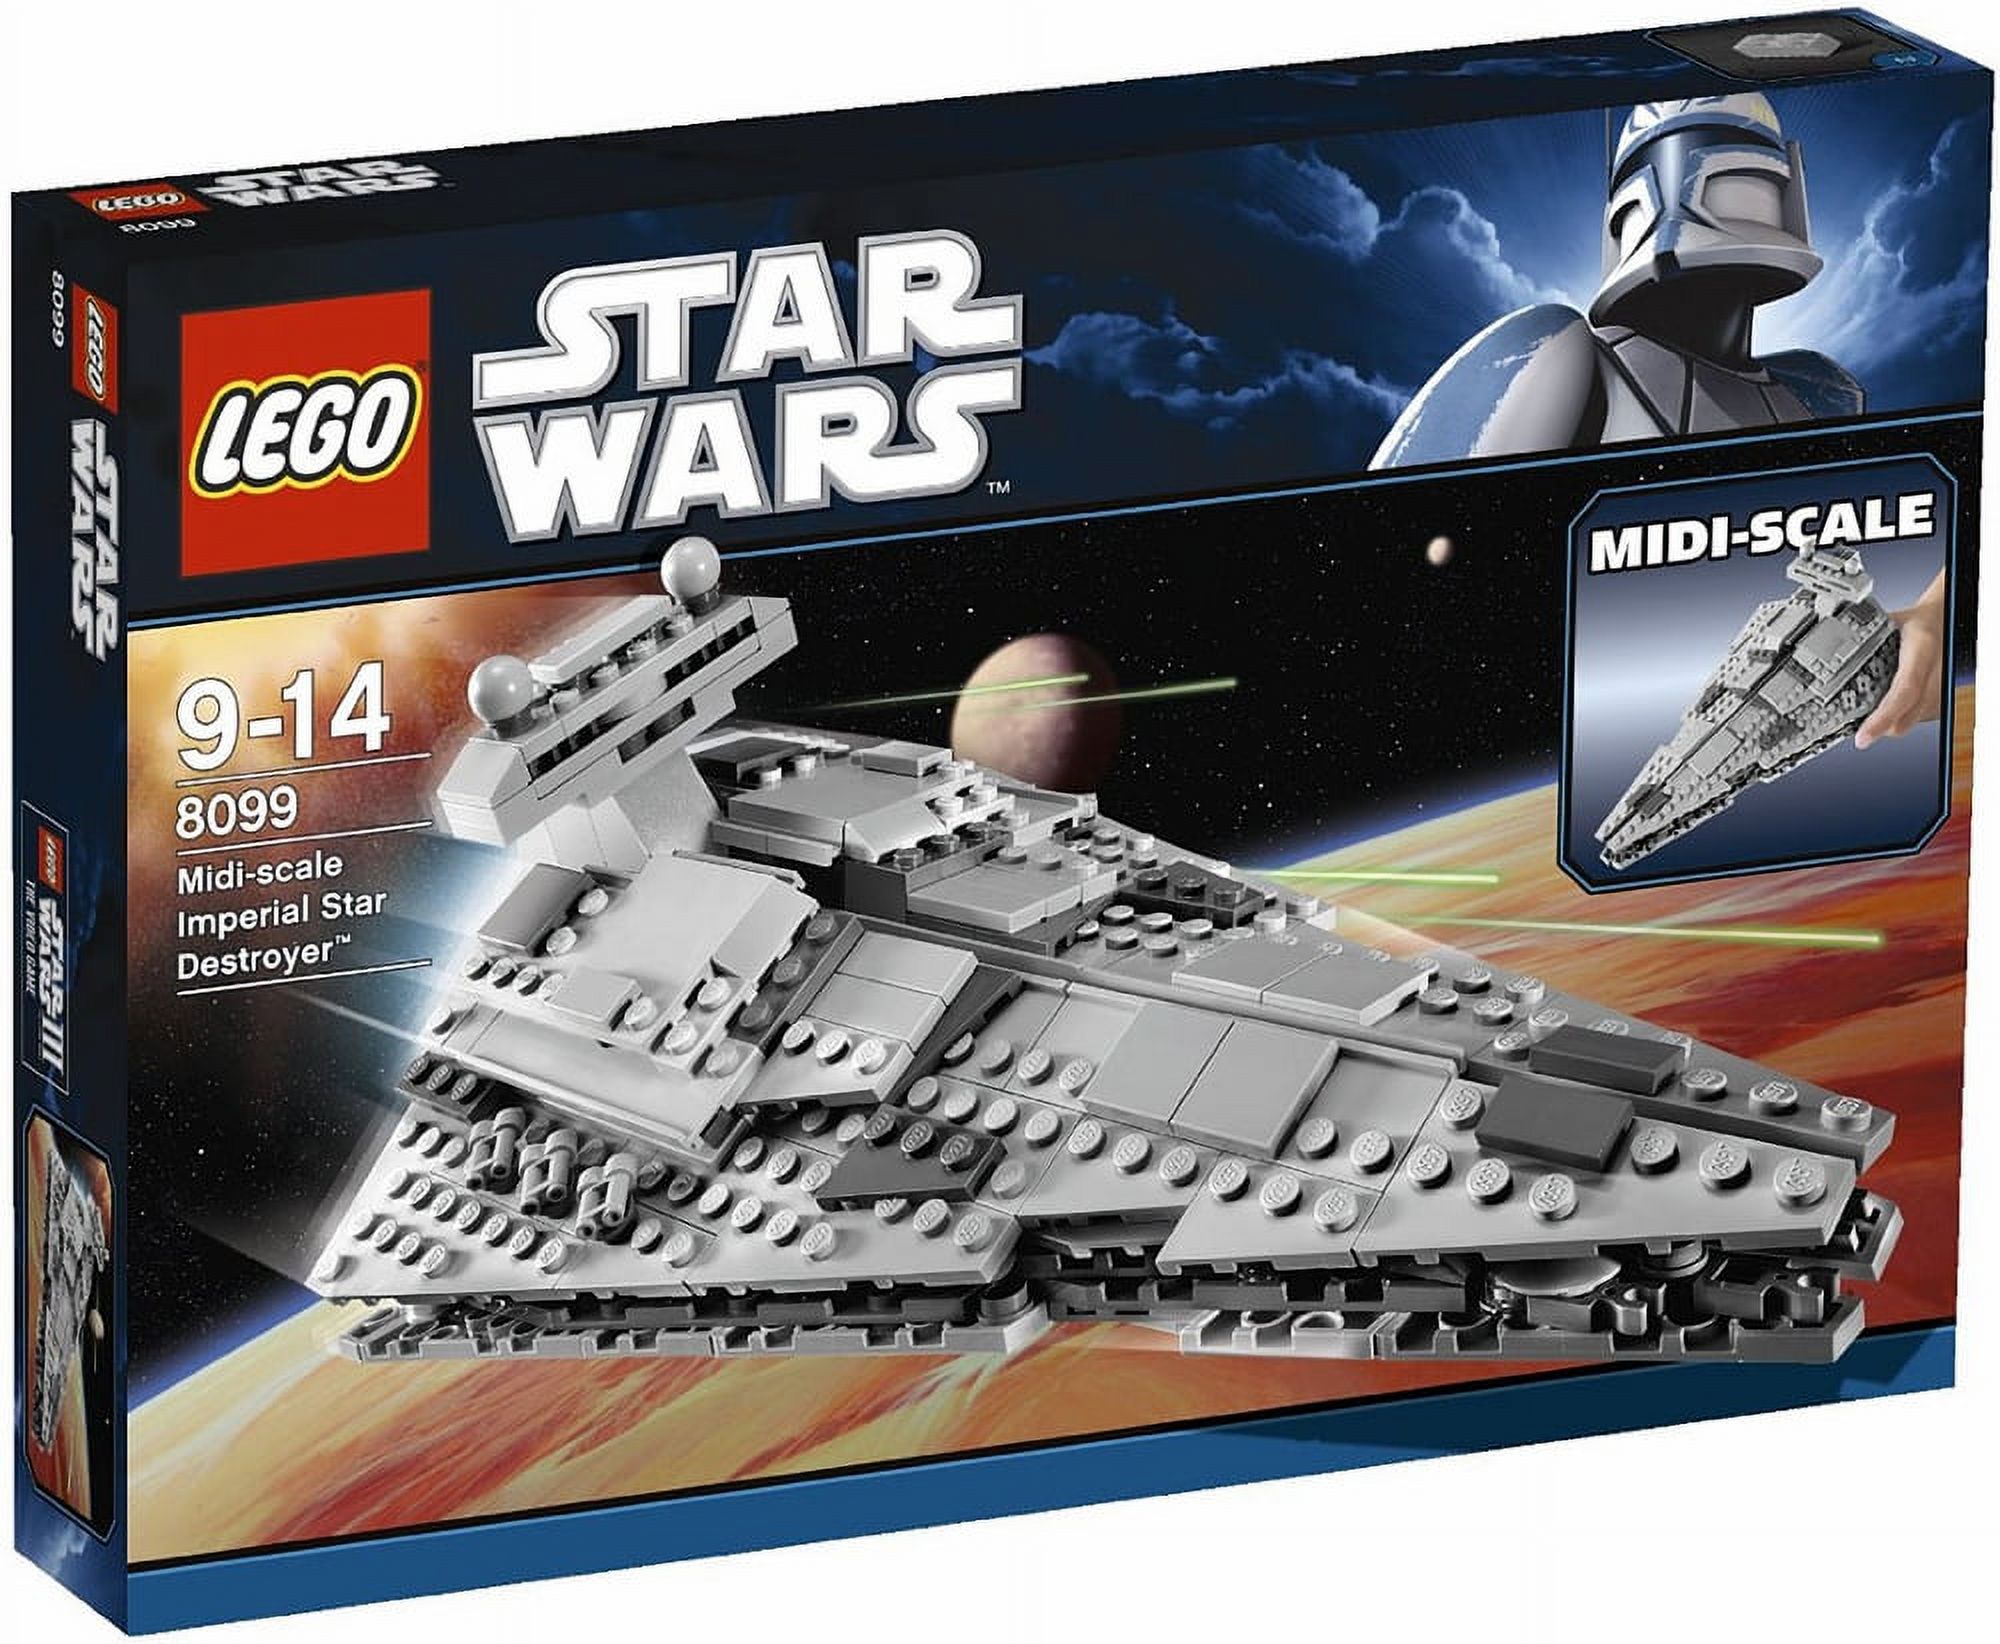 LEGO Star Wars Midi-Scale Imperial Star Destroyer (8099) - image 1 of 2